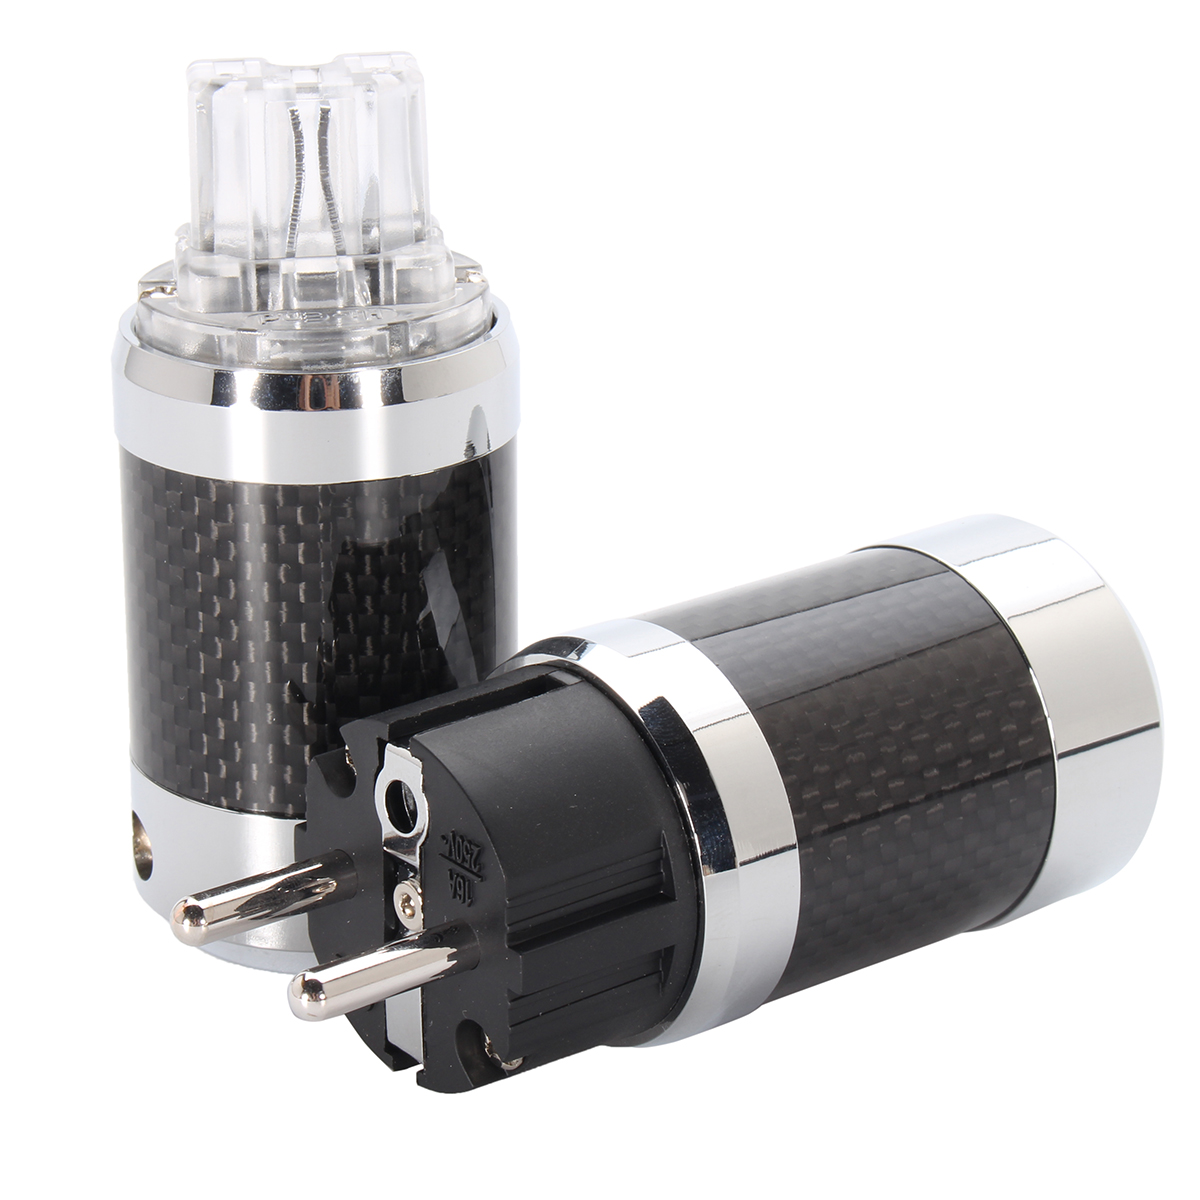 Find Vanguard Carbon Fiber Rhodium Plated IEC Three pole DC Power Plug for Sale on Gipsybee.com with cryptocurrencies